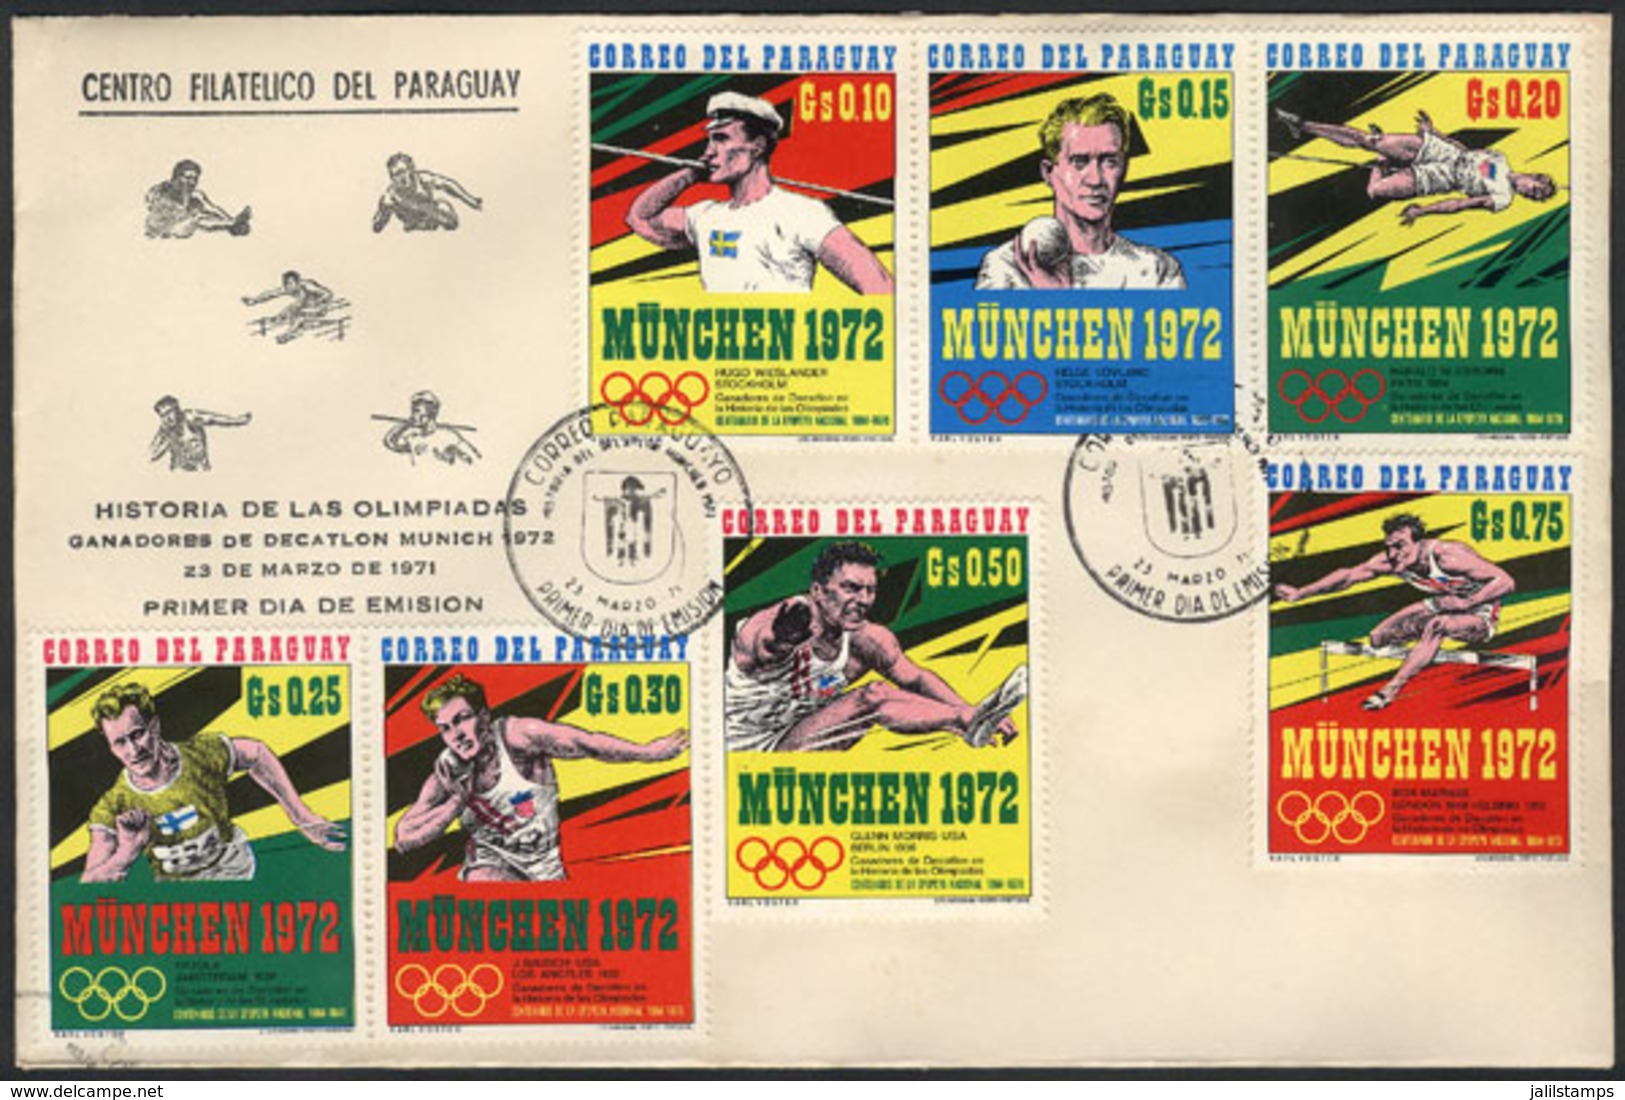 PARAGUAY: München 1972 Olympic Games, The Set On A First Day Cover, VF Quality! - Paraguay